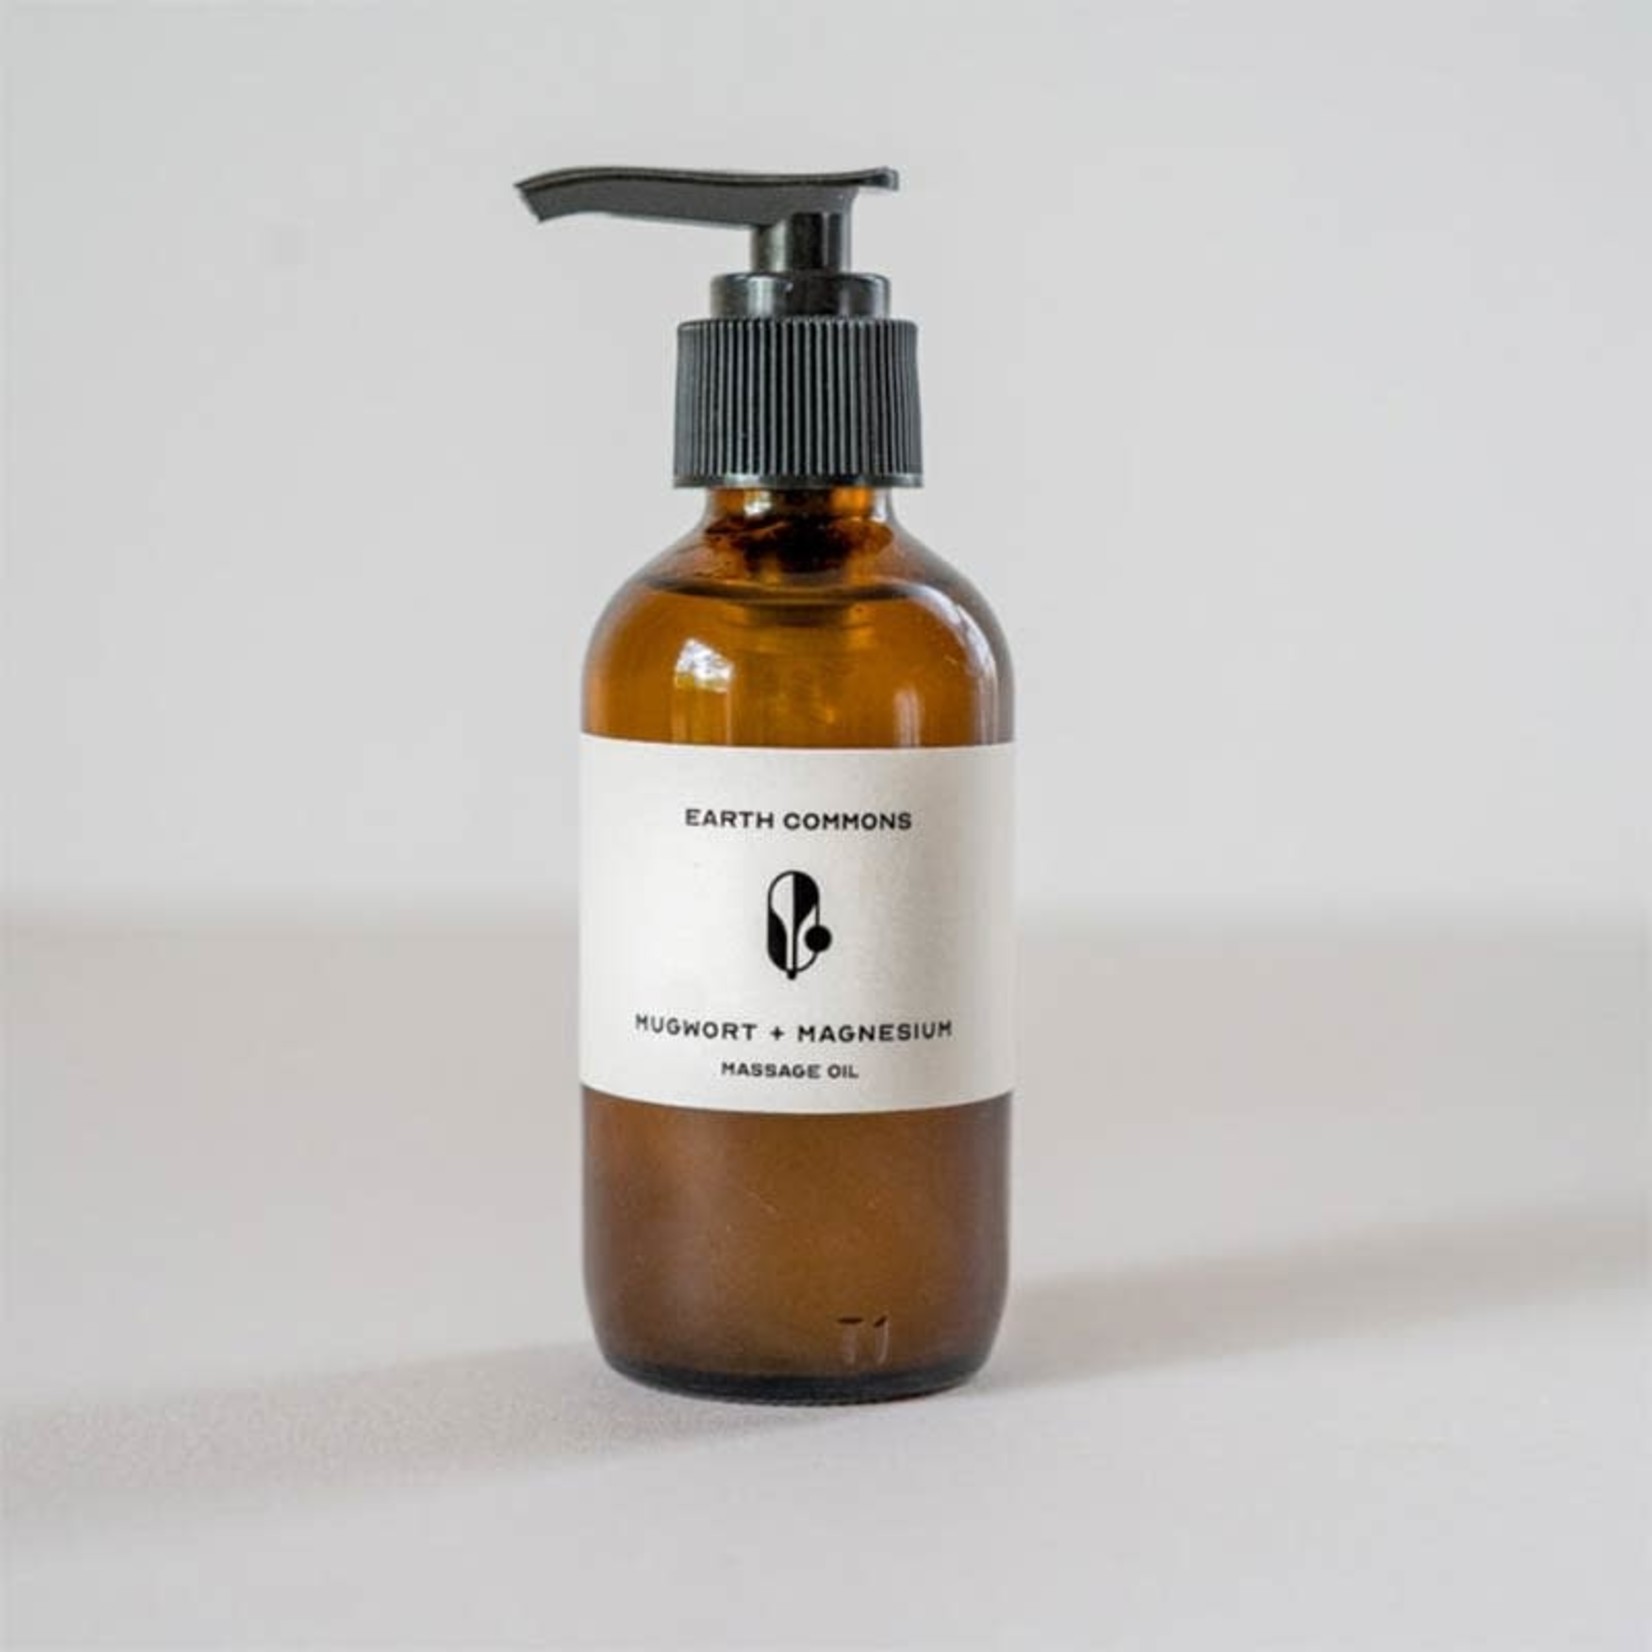 Earth Commons Mugwort + Magnesium Massage Oil by Earth Commons